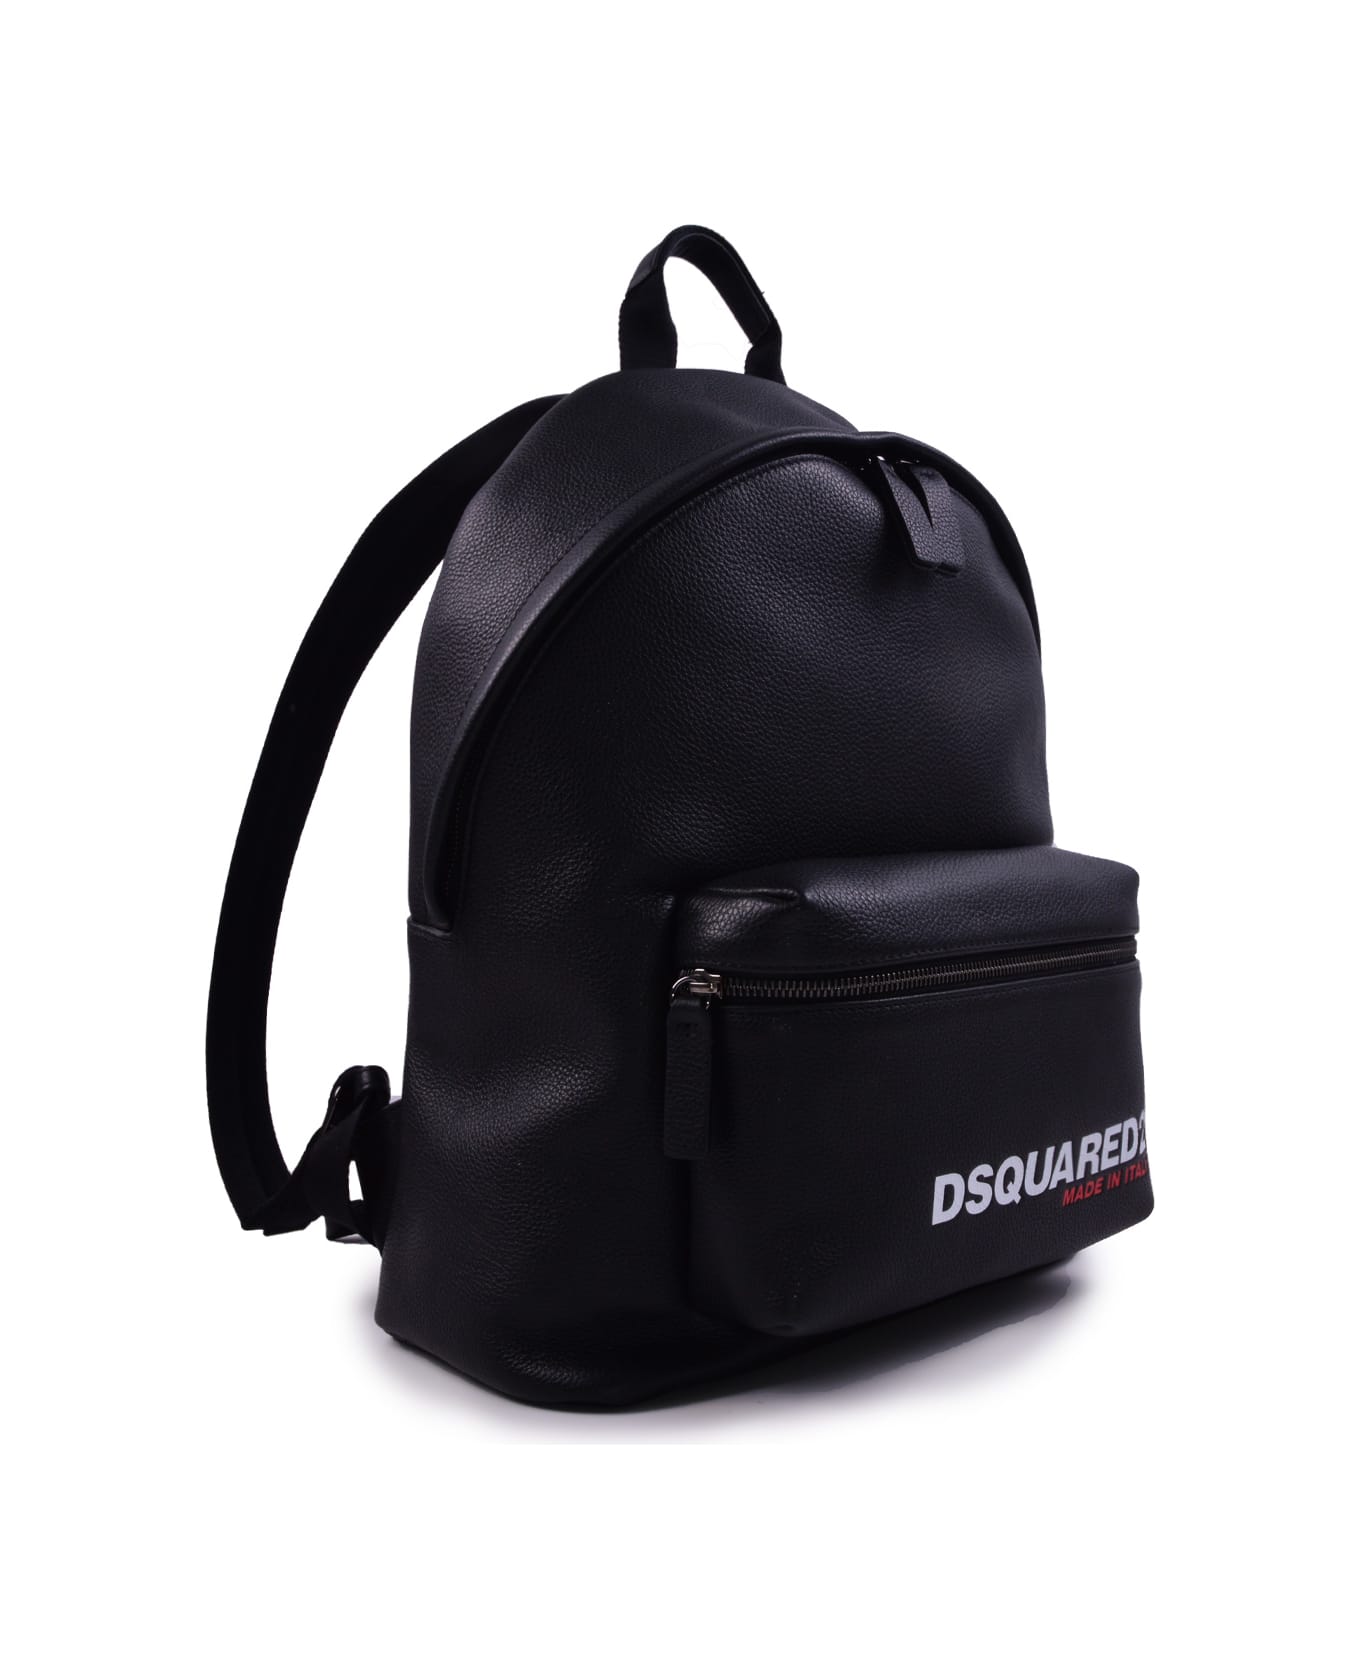 Dsquared2 Hammered Leather Backpack With Logo - Black